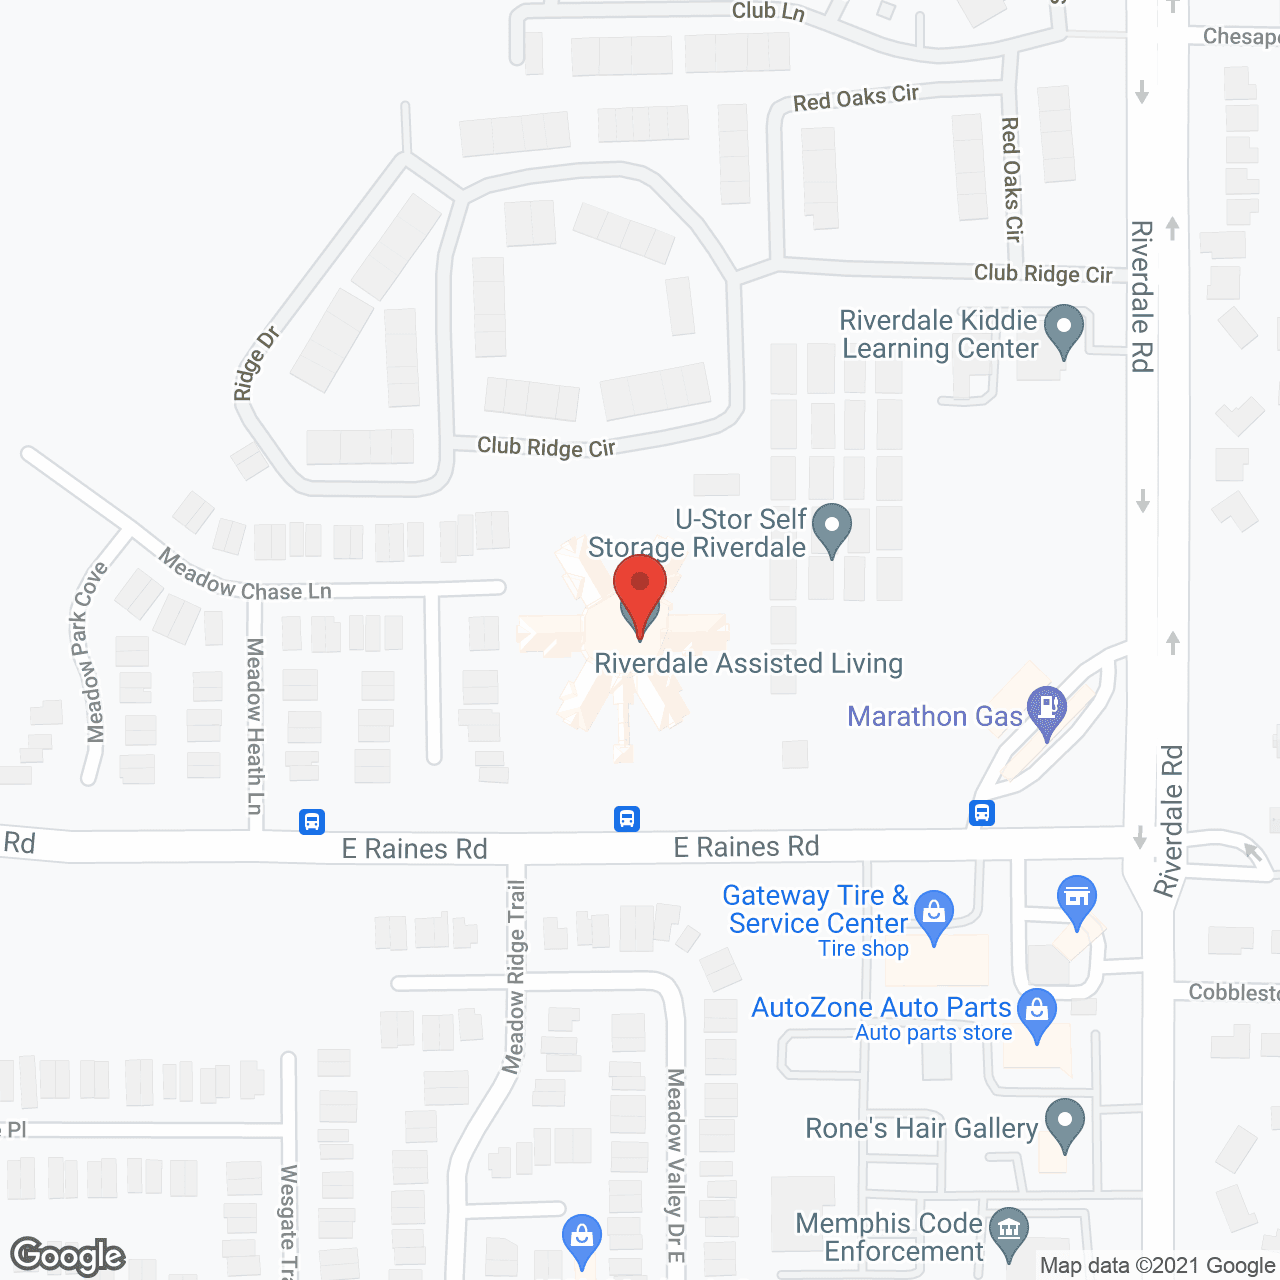 Riverdale Assisted Living in google map